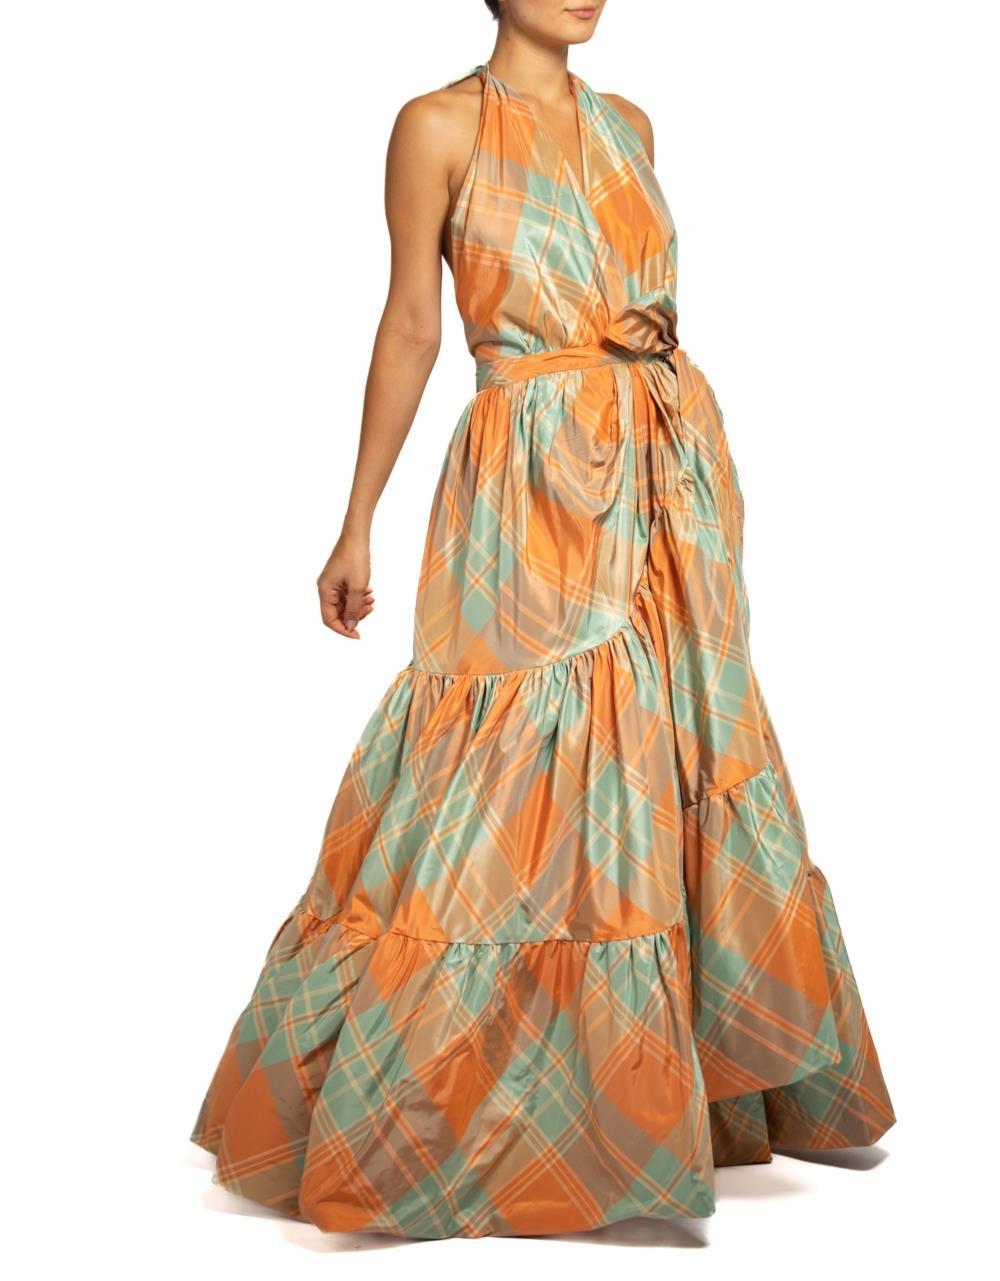 MORPHEW COLLECTION Orange & Aqua Silk Taffeta Plaid Gown MASTER In Excellent Condition For Sale In New York, NY